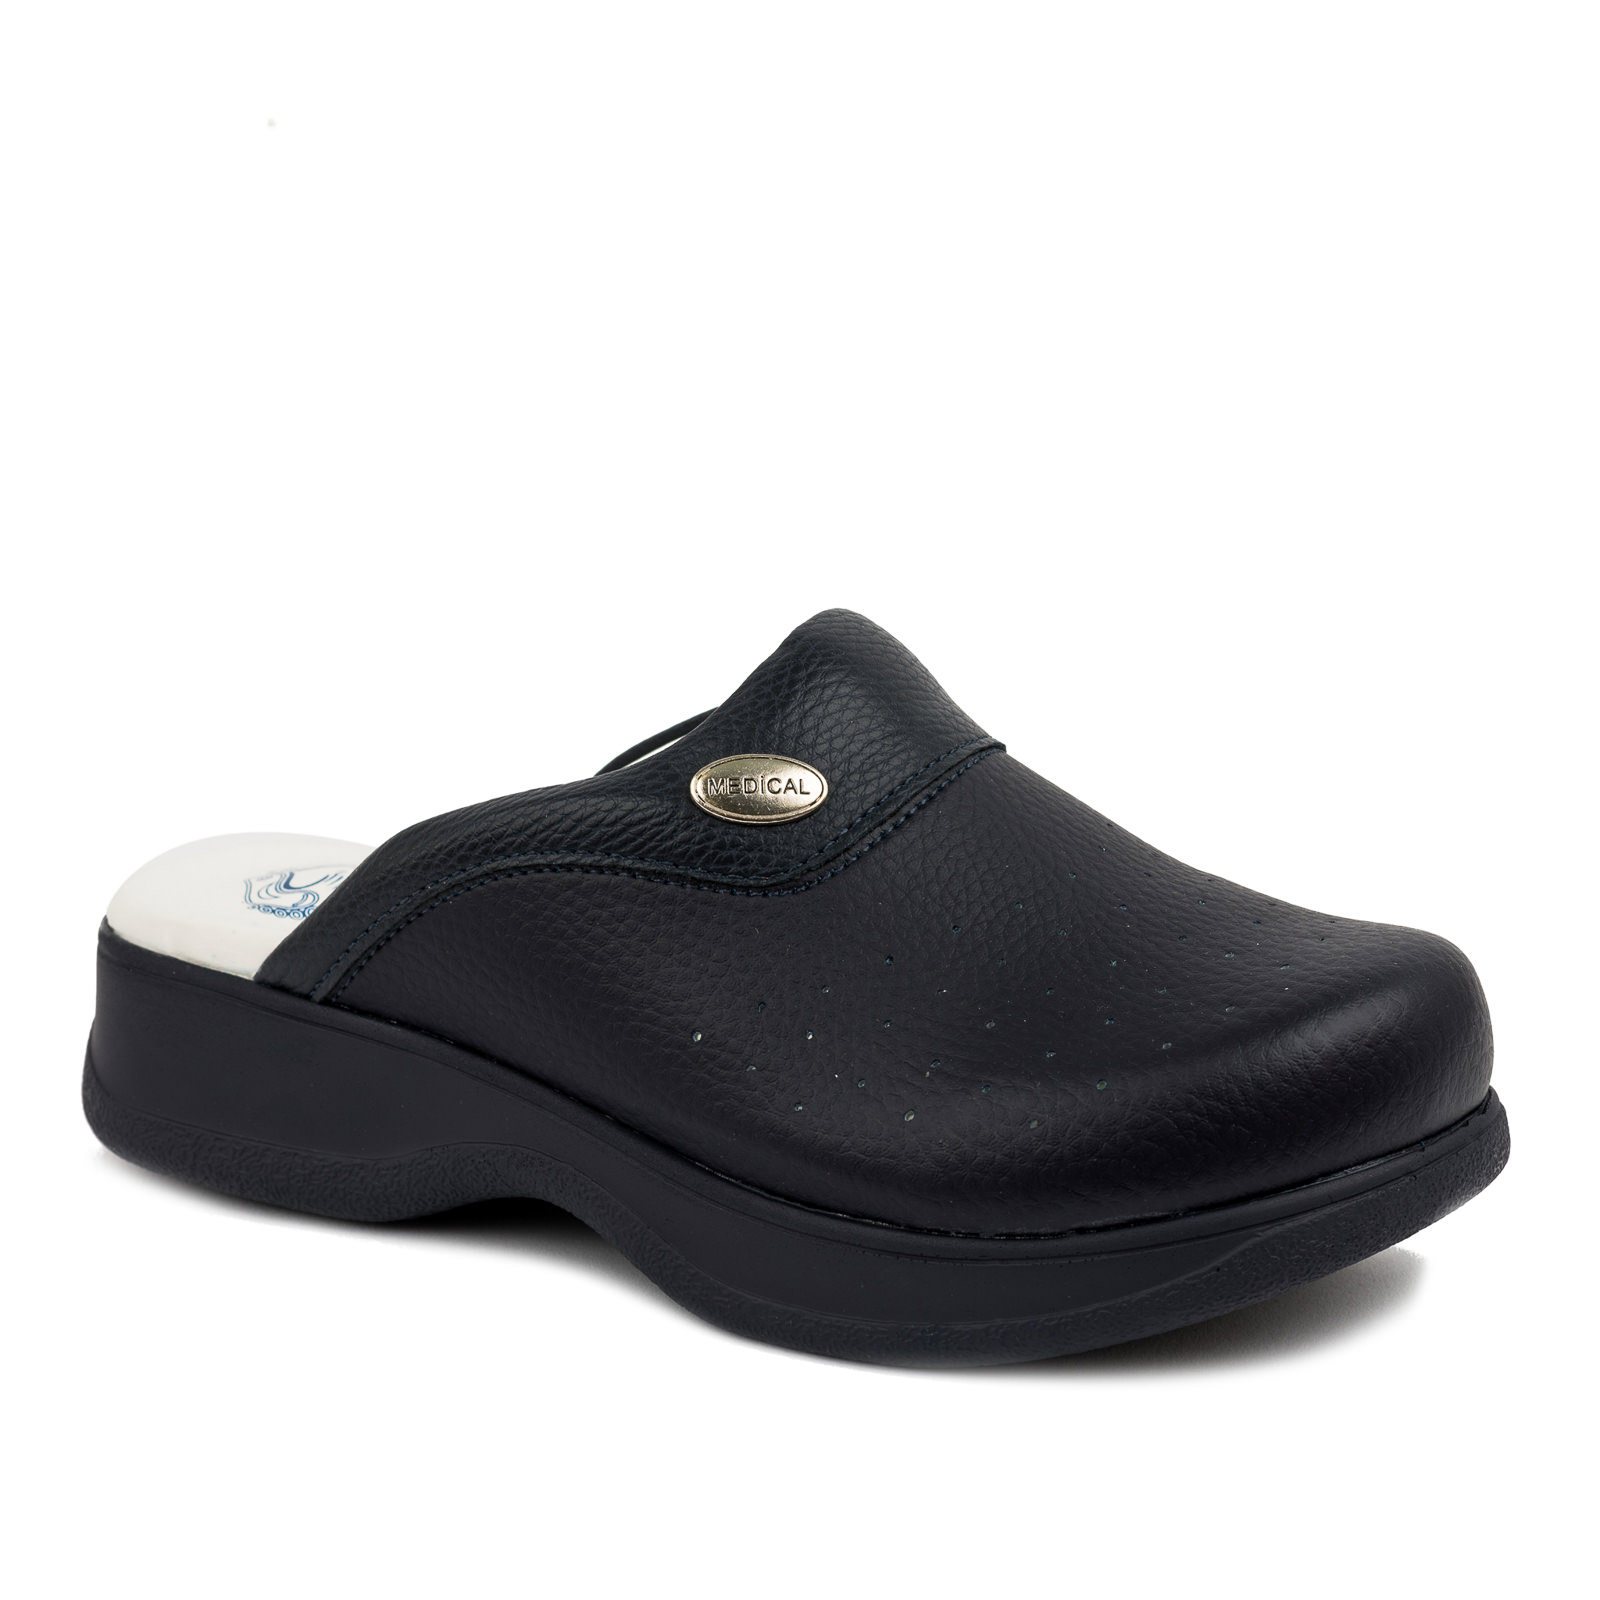 HOLLOW MEDICAL SOLE CLOGS - BLACK